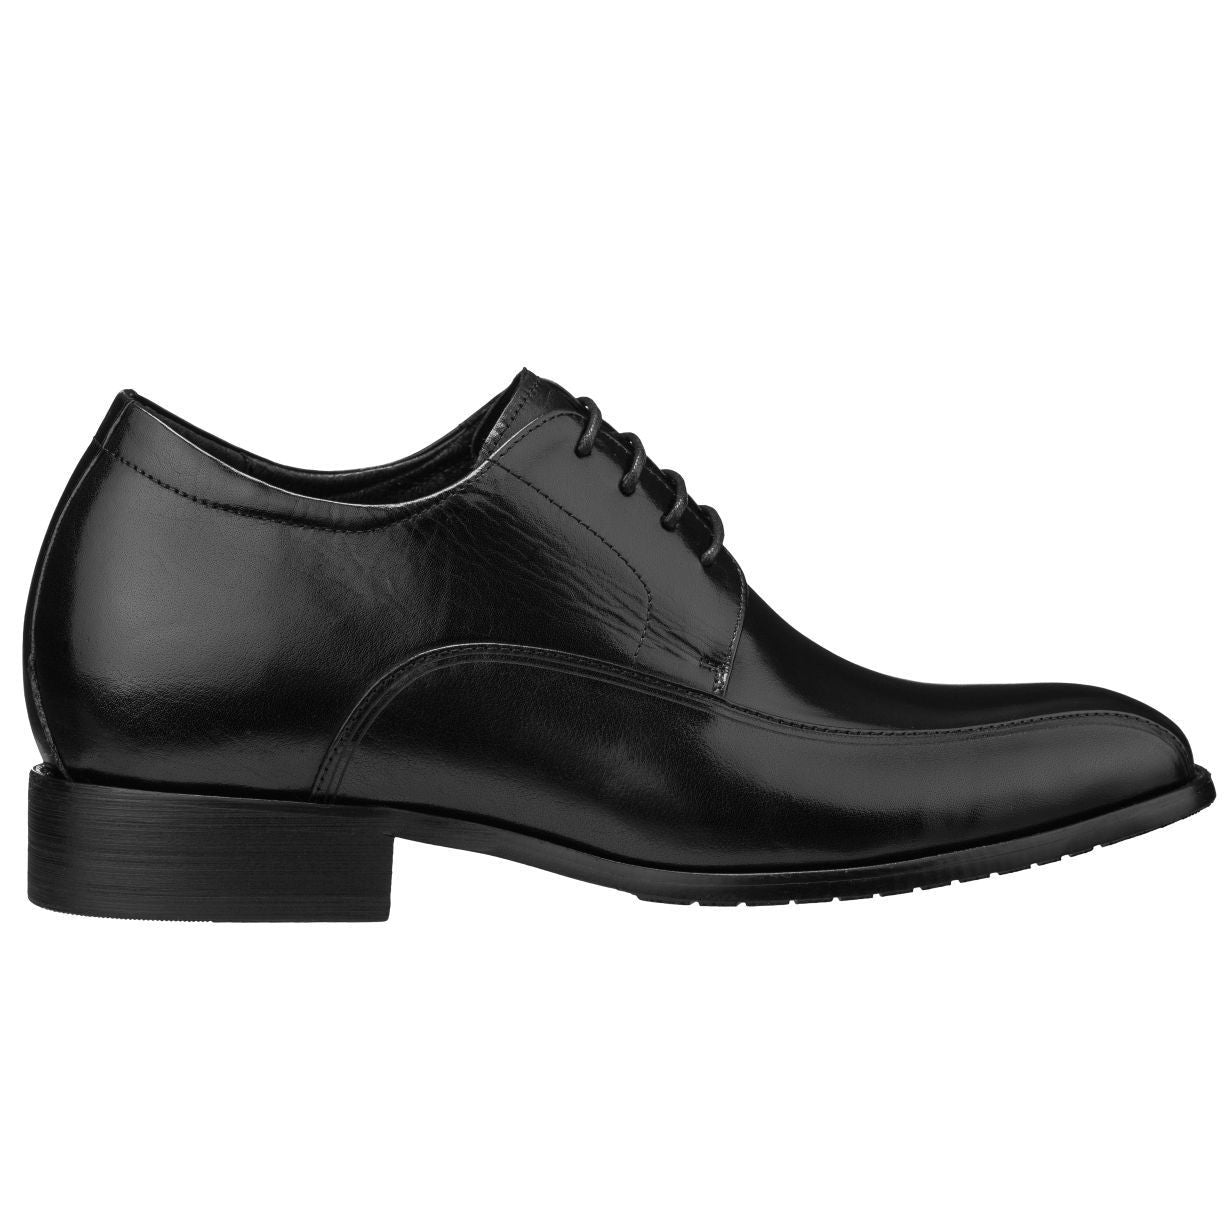 Elevator shoes height increase CALTO - Y1003 - 2.8 Inches Taller (Black)